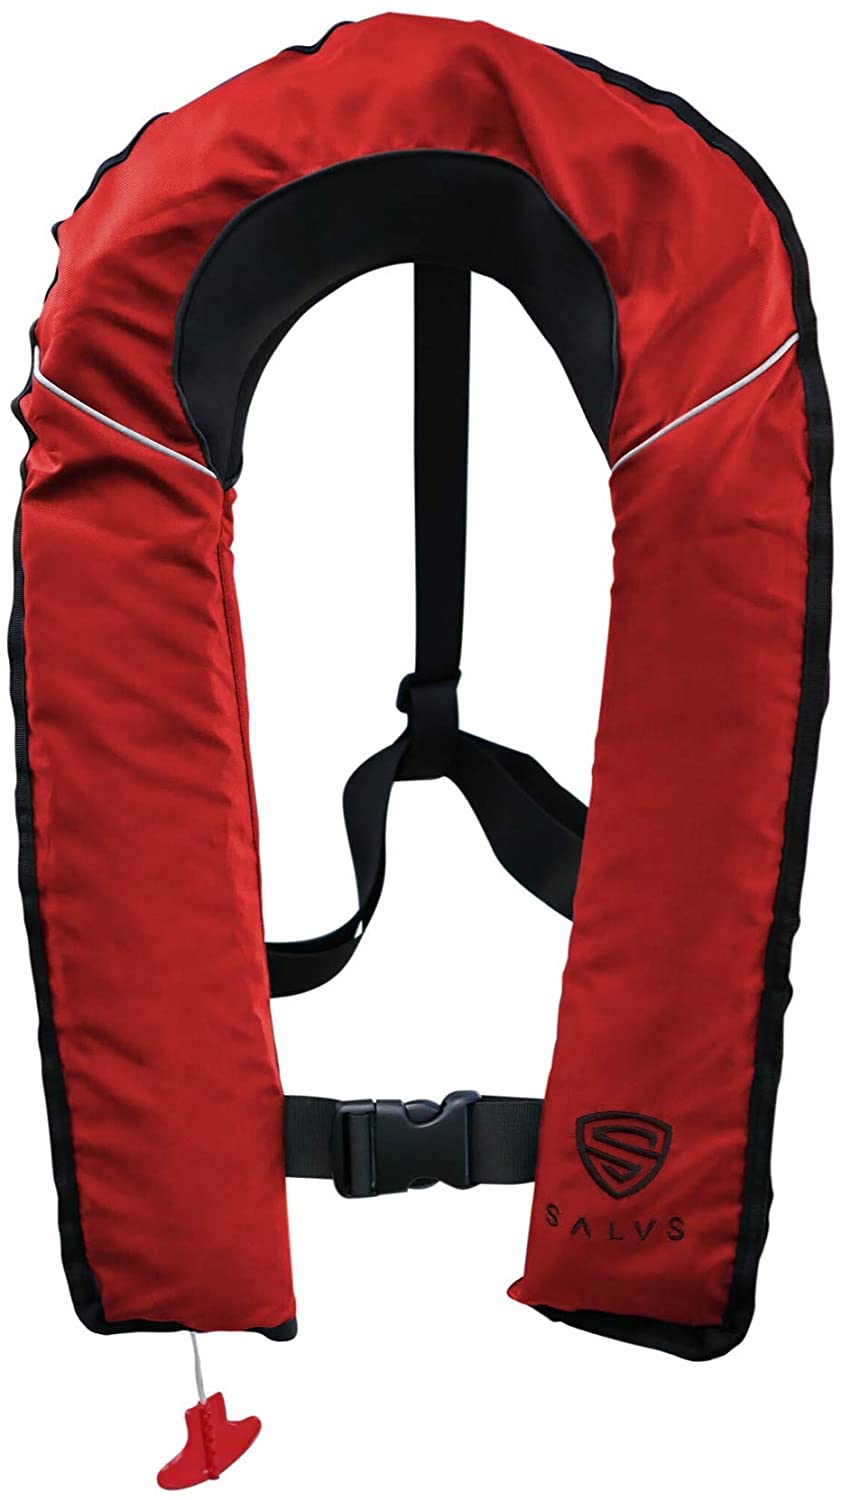 SALVS Automatic Inflatable Life Jacket for Adults